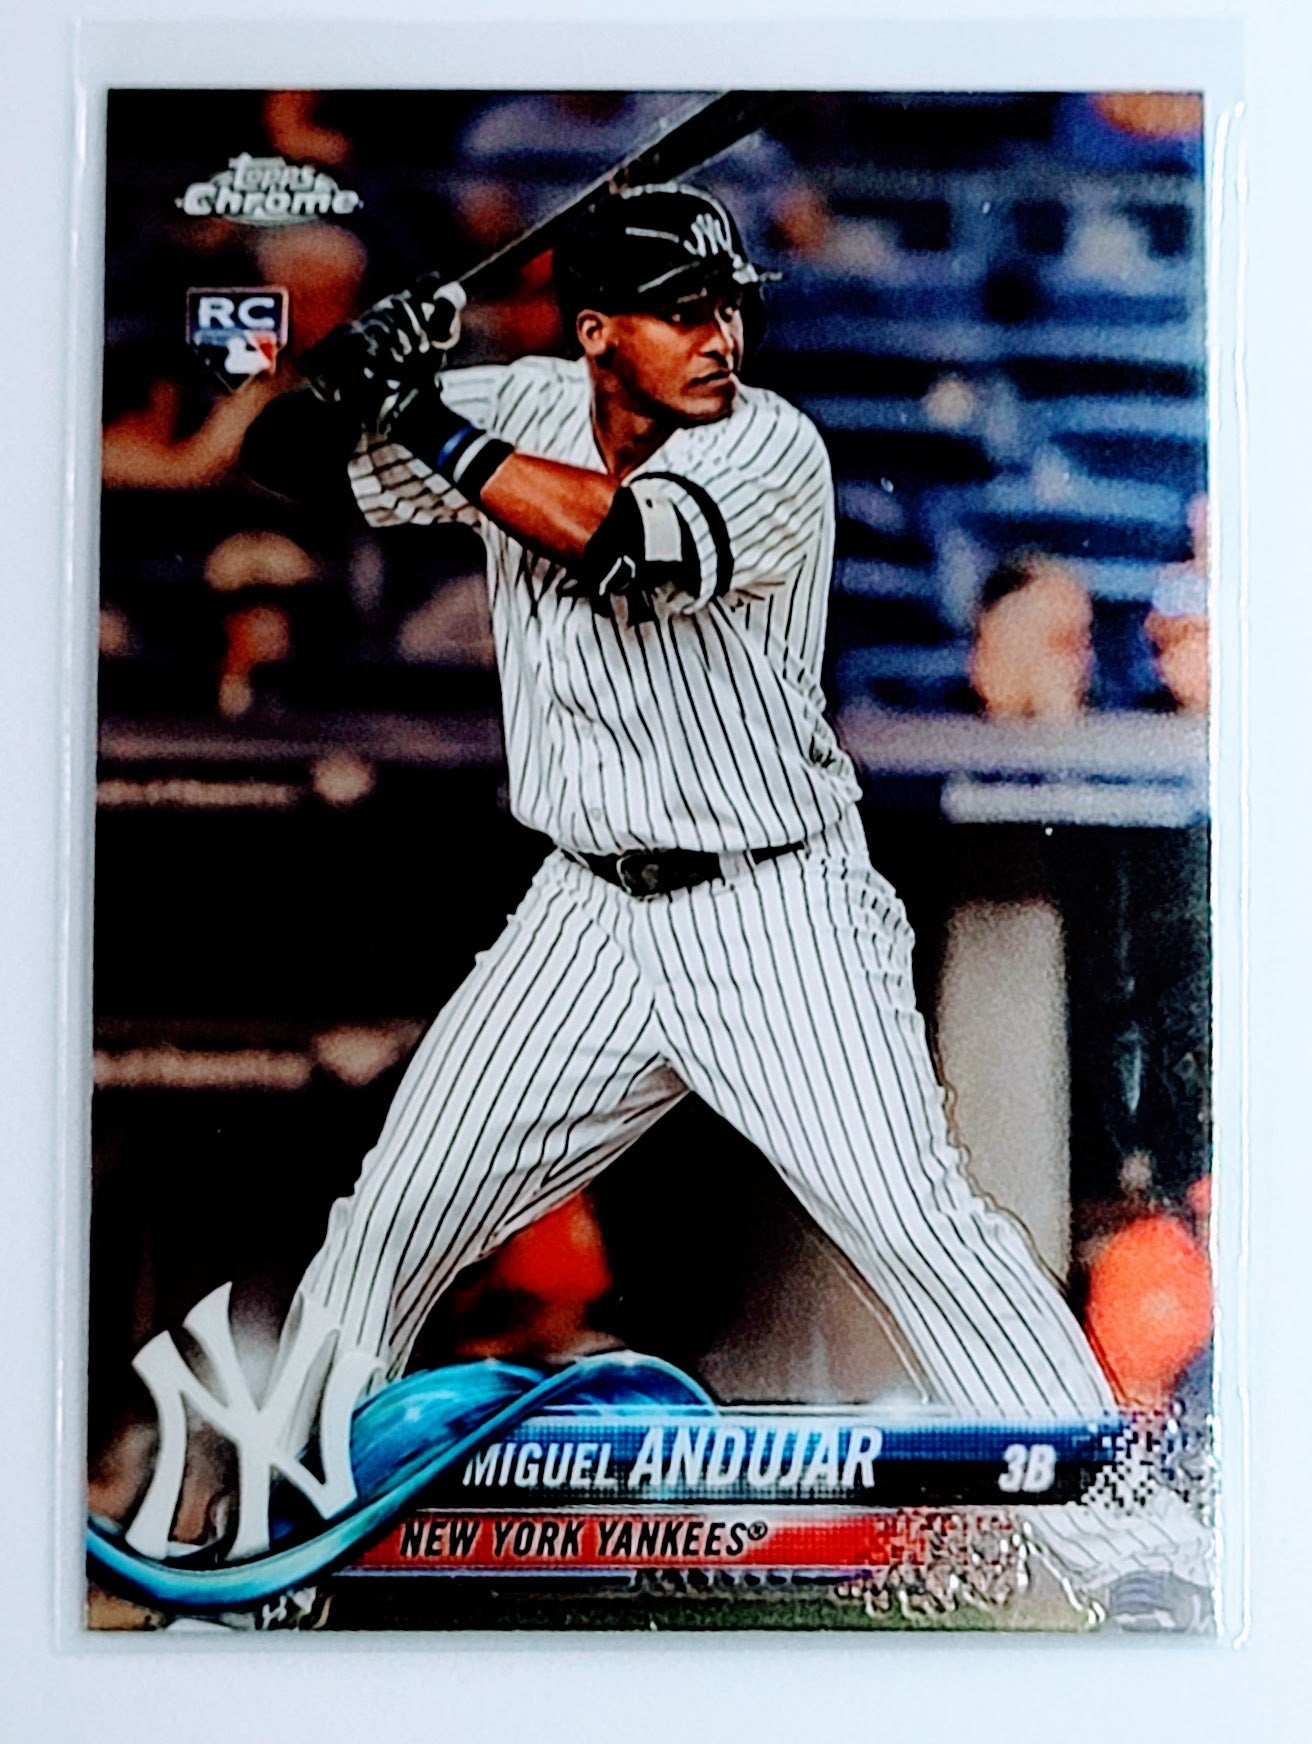 2018 Topps Chrome Miguel Andujar Baseball Card  TH13C simple Xclusive Collectibles   